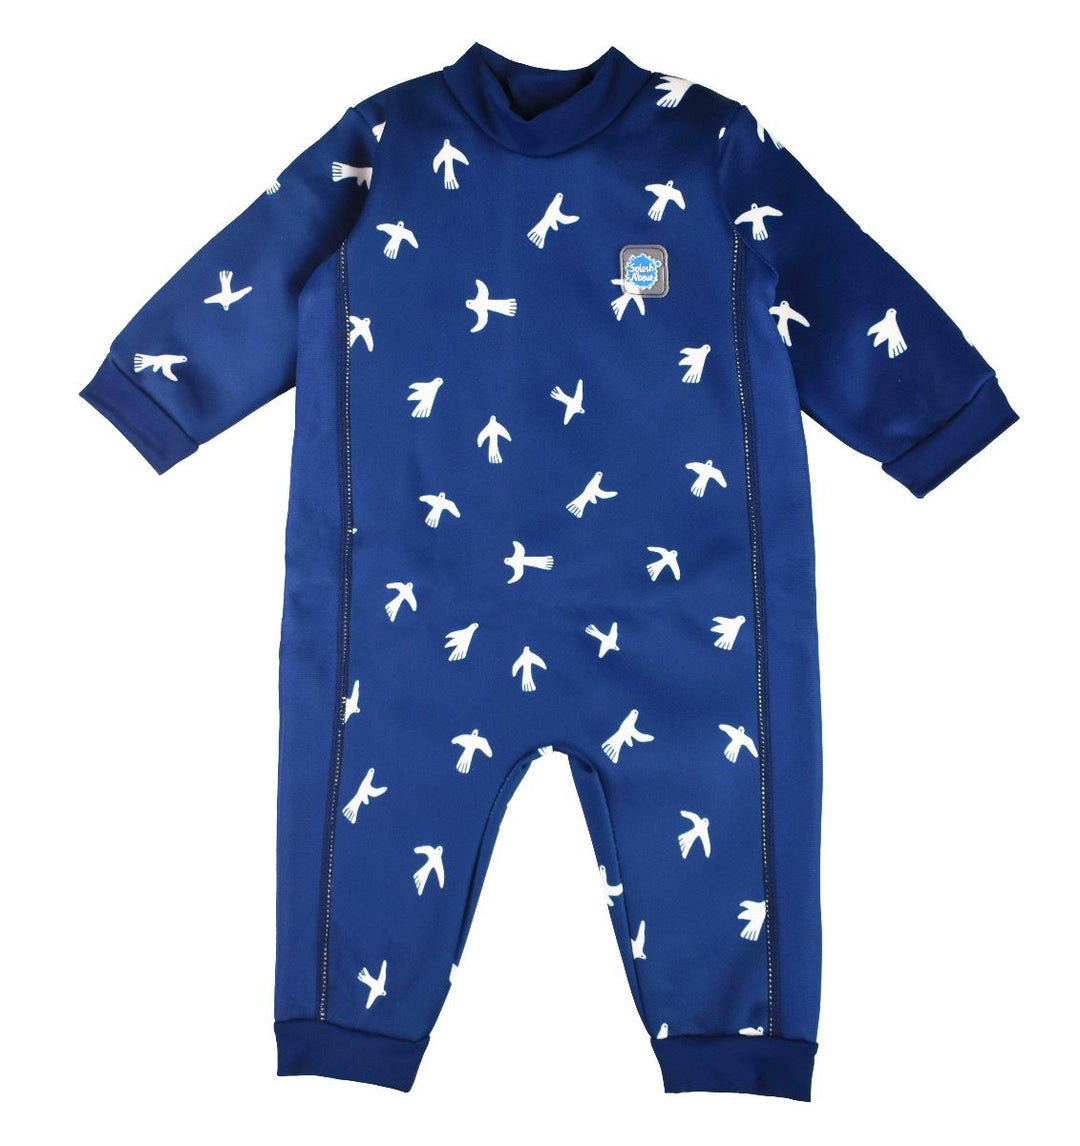 Fleece-lined baby wetsuit in navy blue and minimalist white doves print. Front.